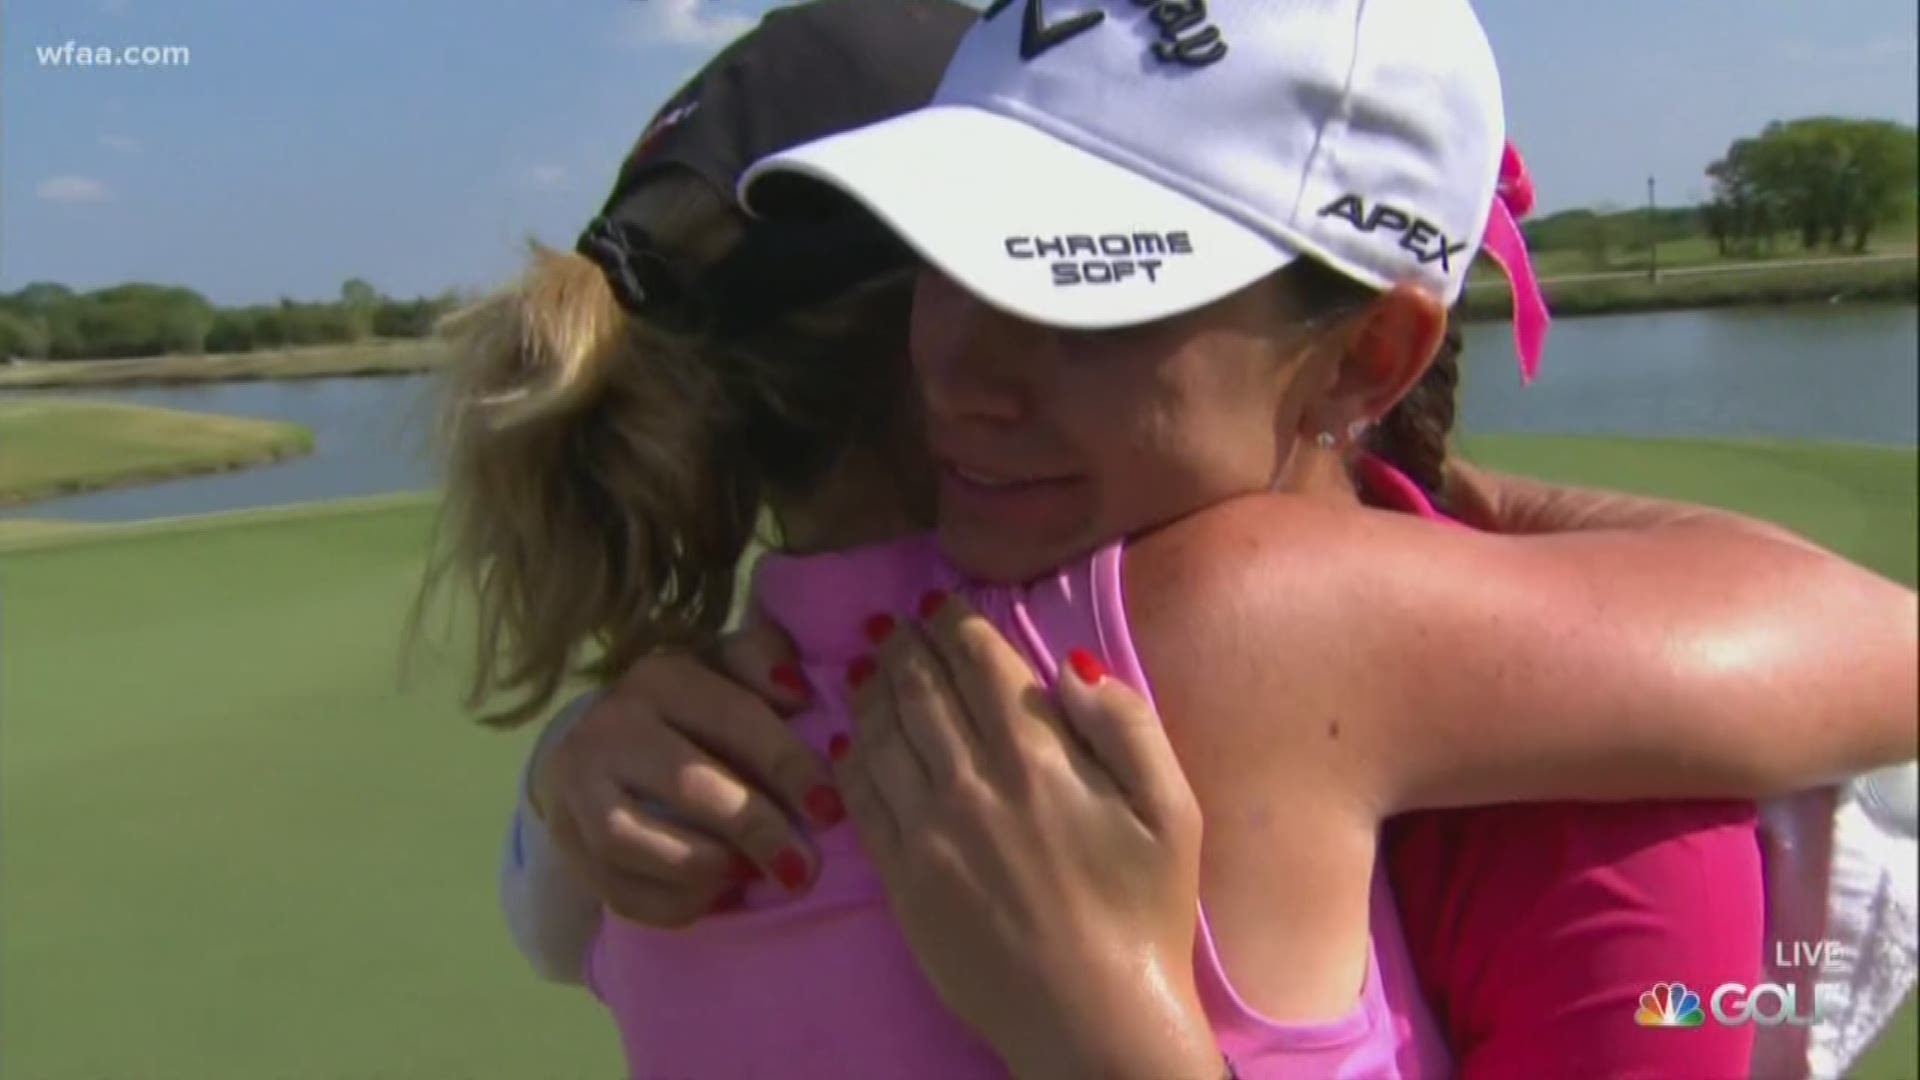 Cheyenne Knight earned her first LPGA Tour win on Sunday, with a pair of 33's on her front and back nines - a fitting tribute to her late brother...